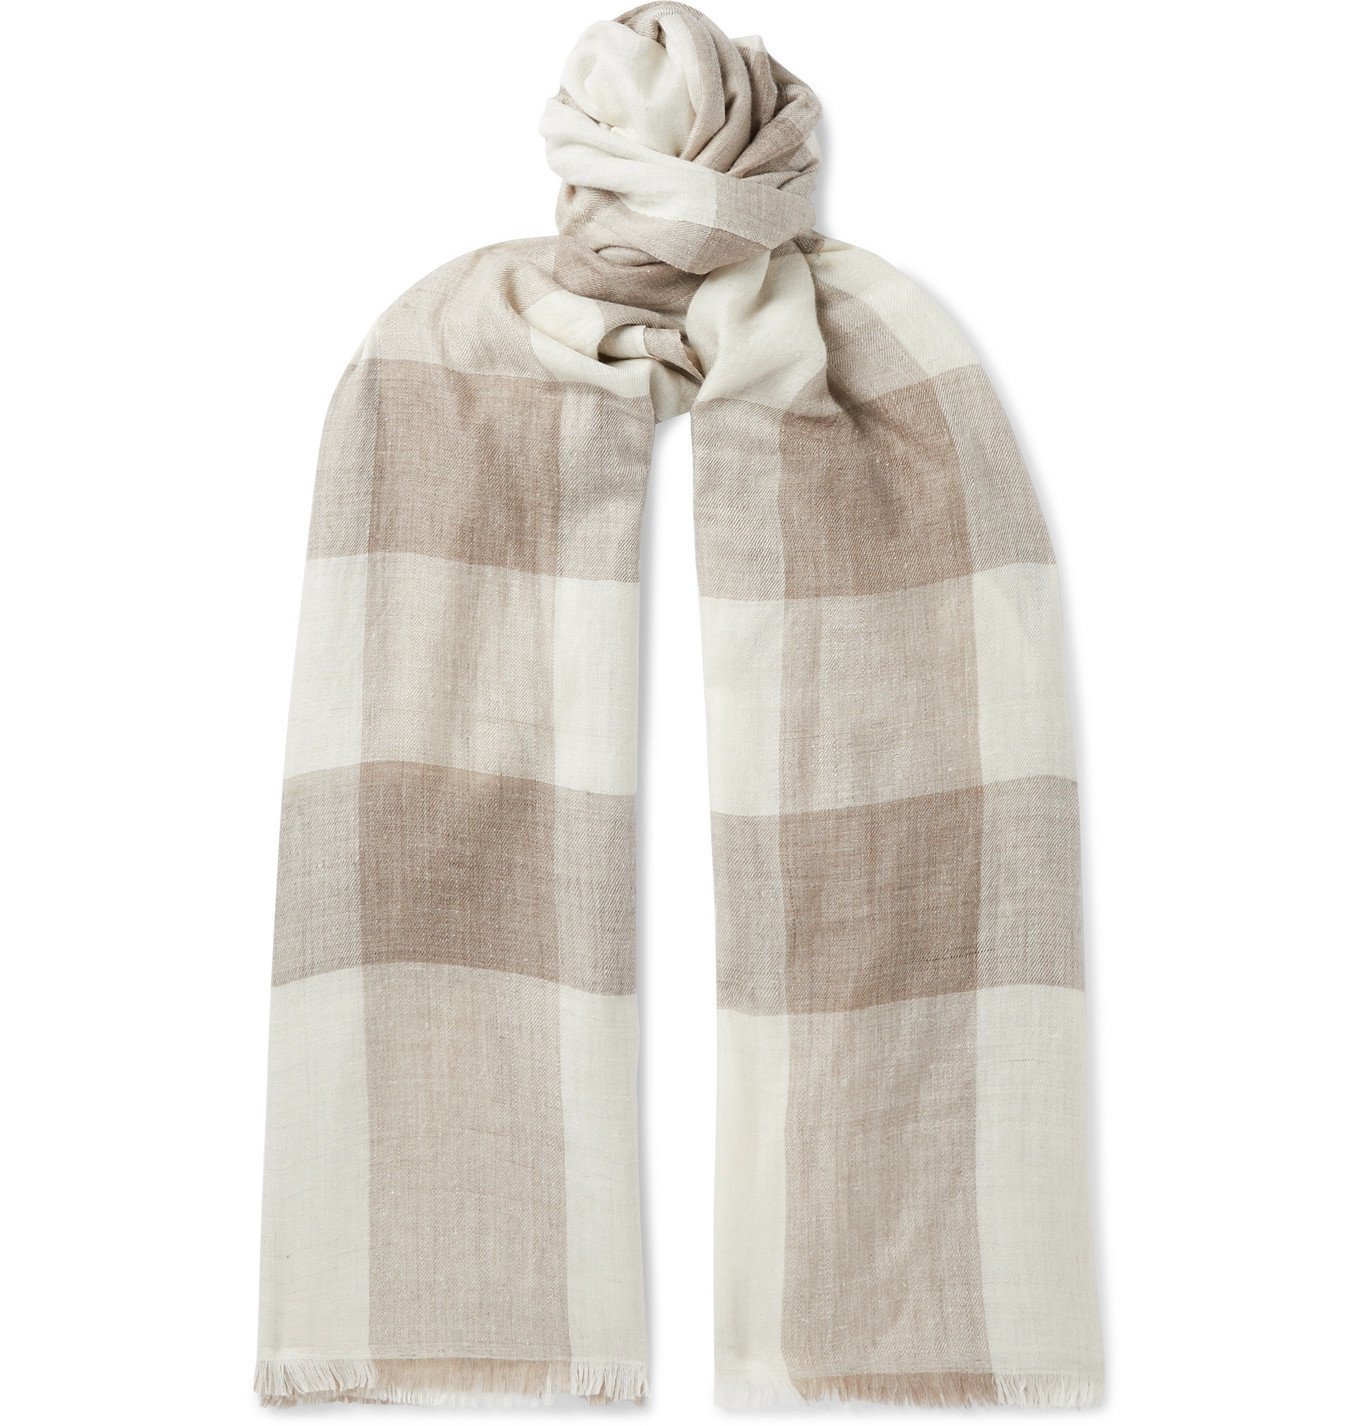 Anderson & Sheppard - Fringed Checked Cashmere Scarf - Neutrals ...